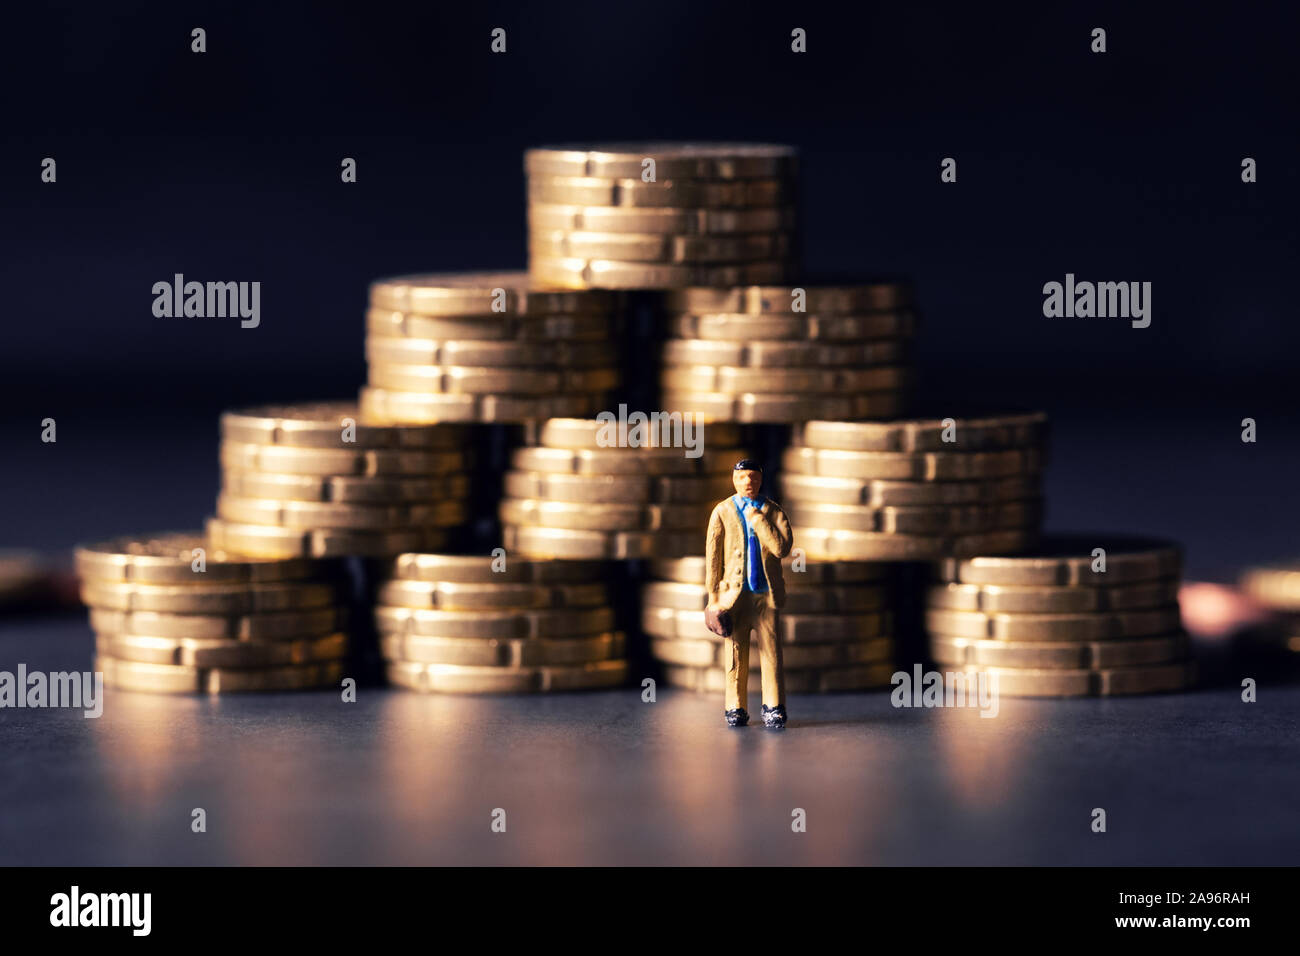 money growth and business success concept. businessman figurine with coins pyramid Stock Photo